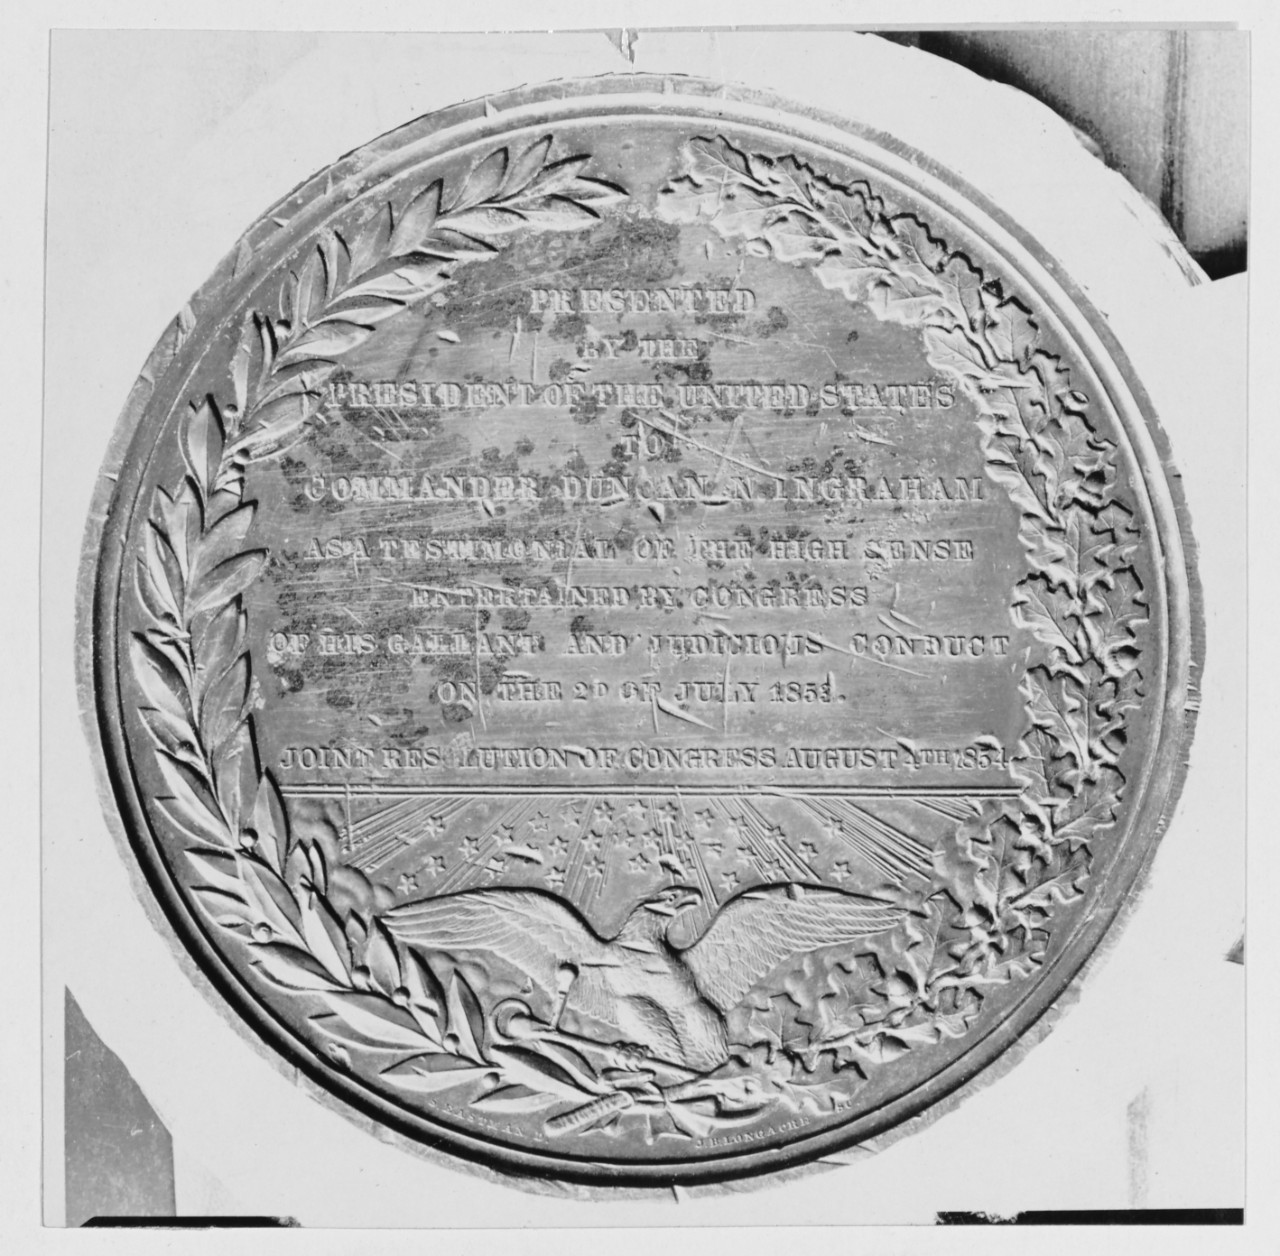 Congressional medal